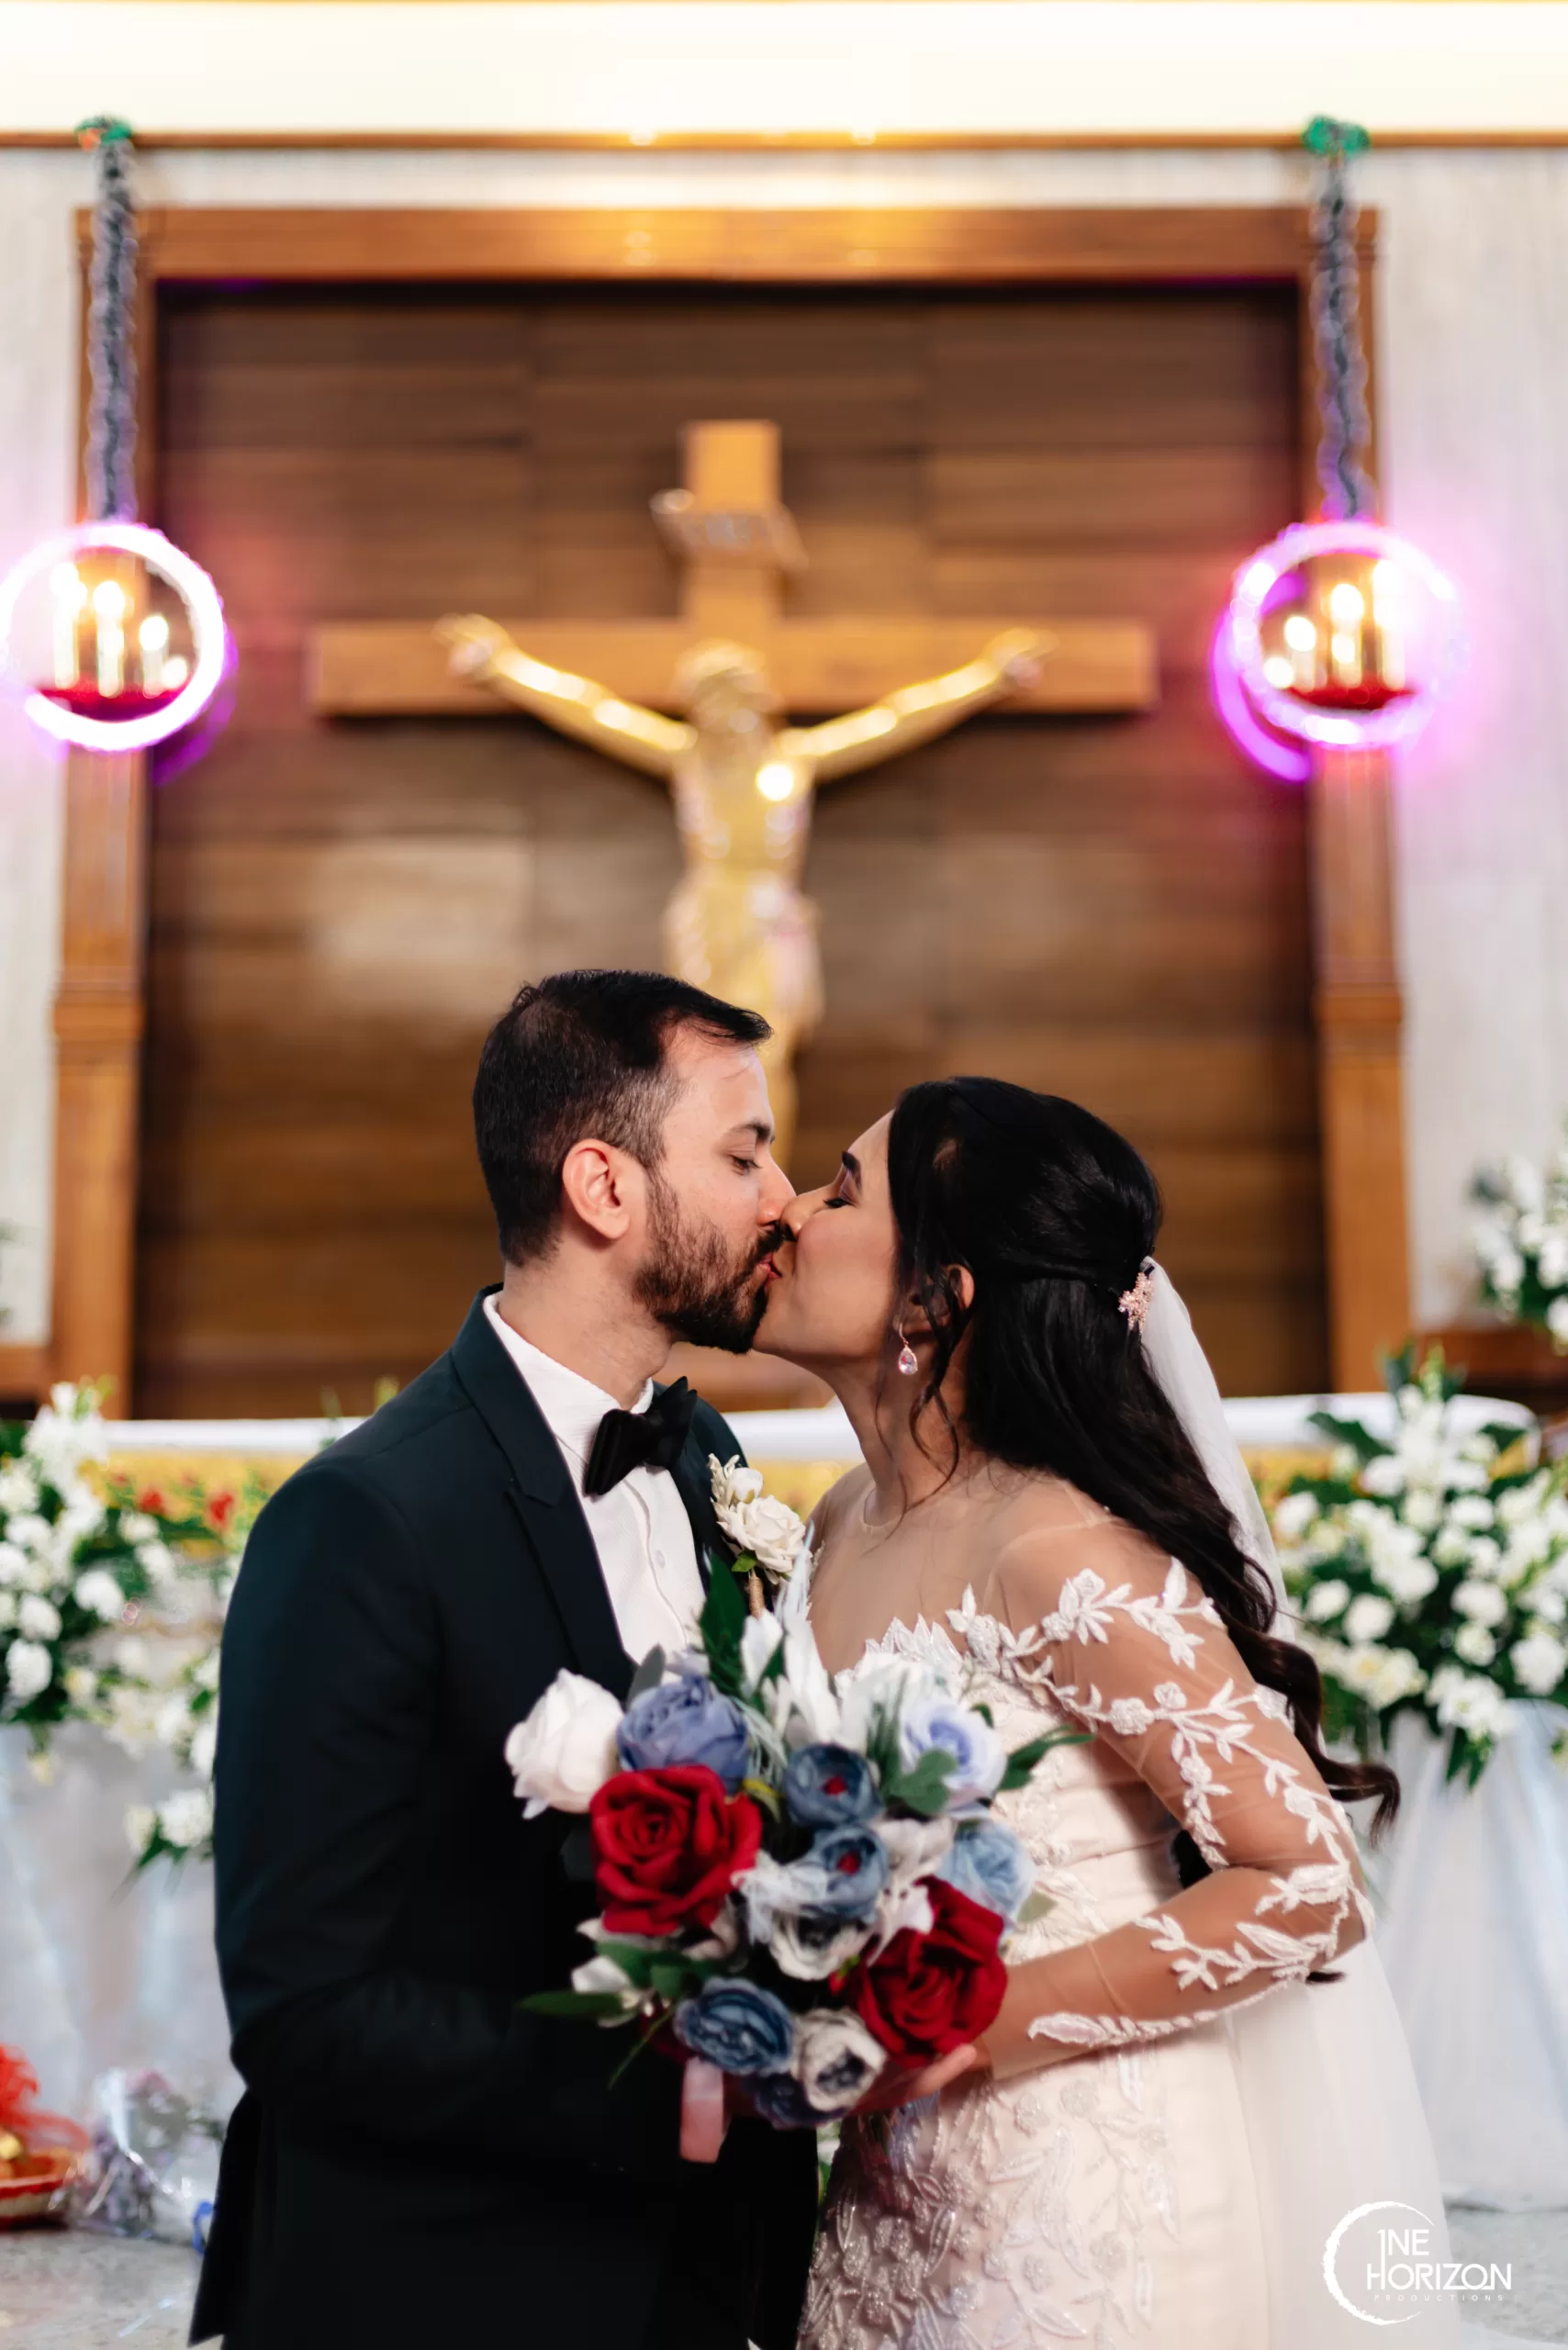 The Orchid Glam | Christian Wedding Tale of Priyanka & Jean @rythm.divine  @jeanjkj Be it the pearly white hues or the surreal grace of… | Instagram